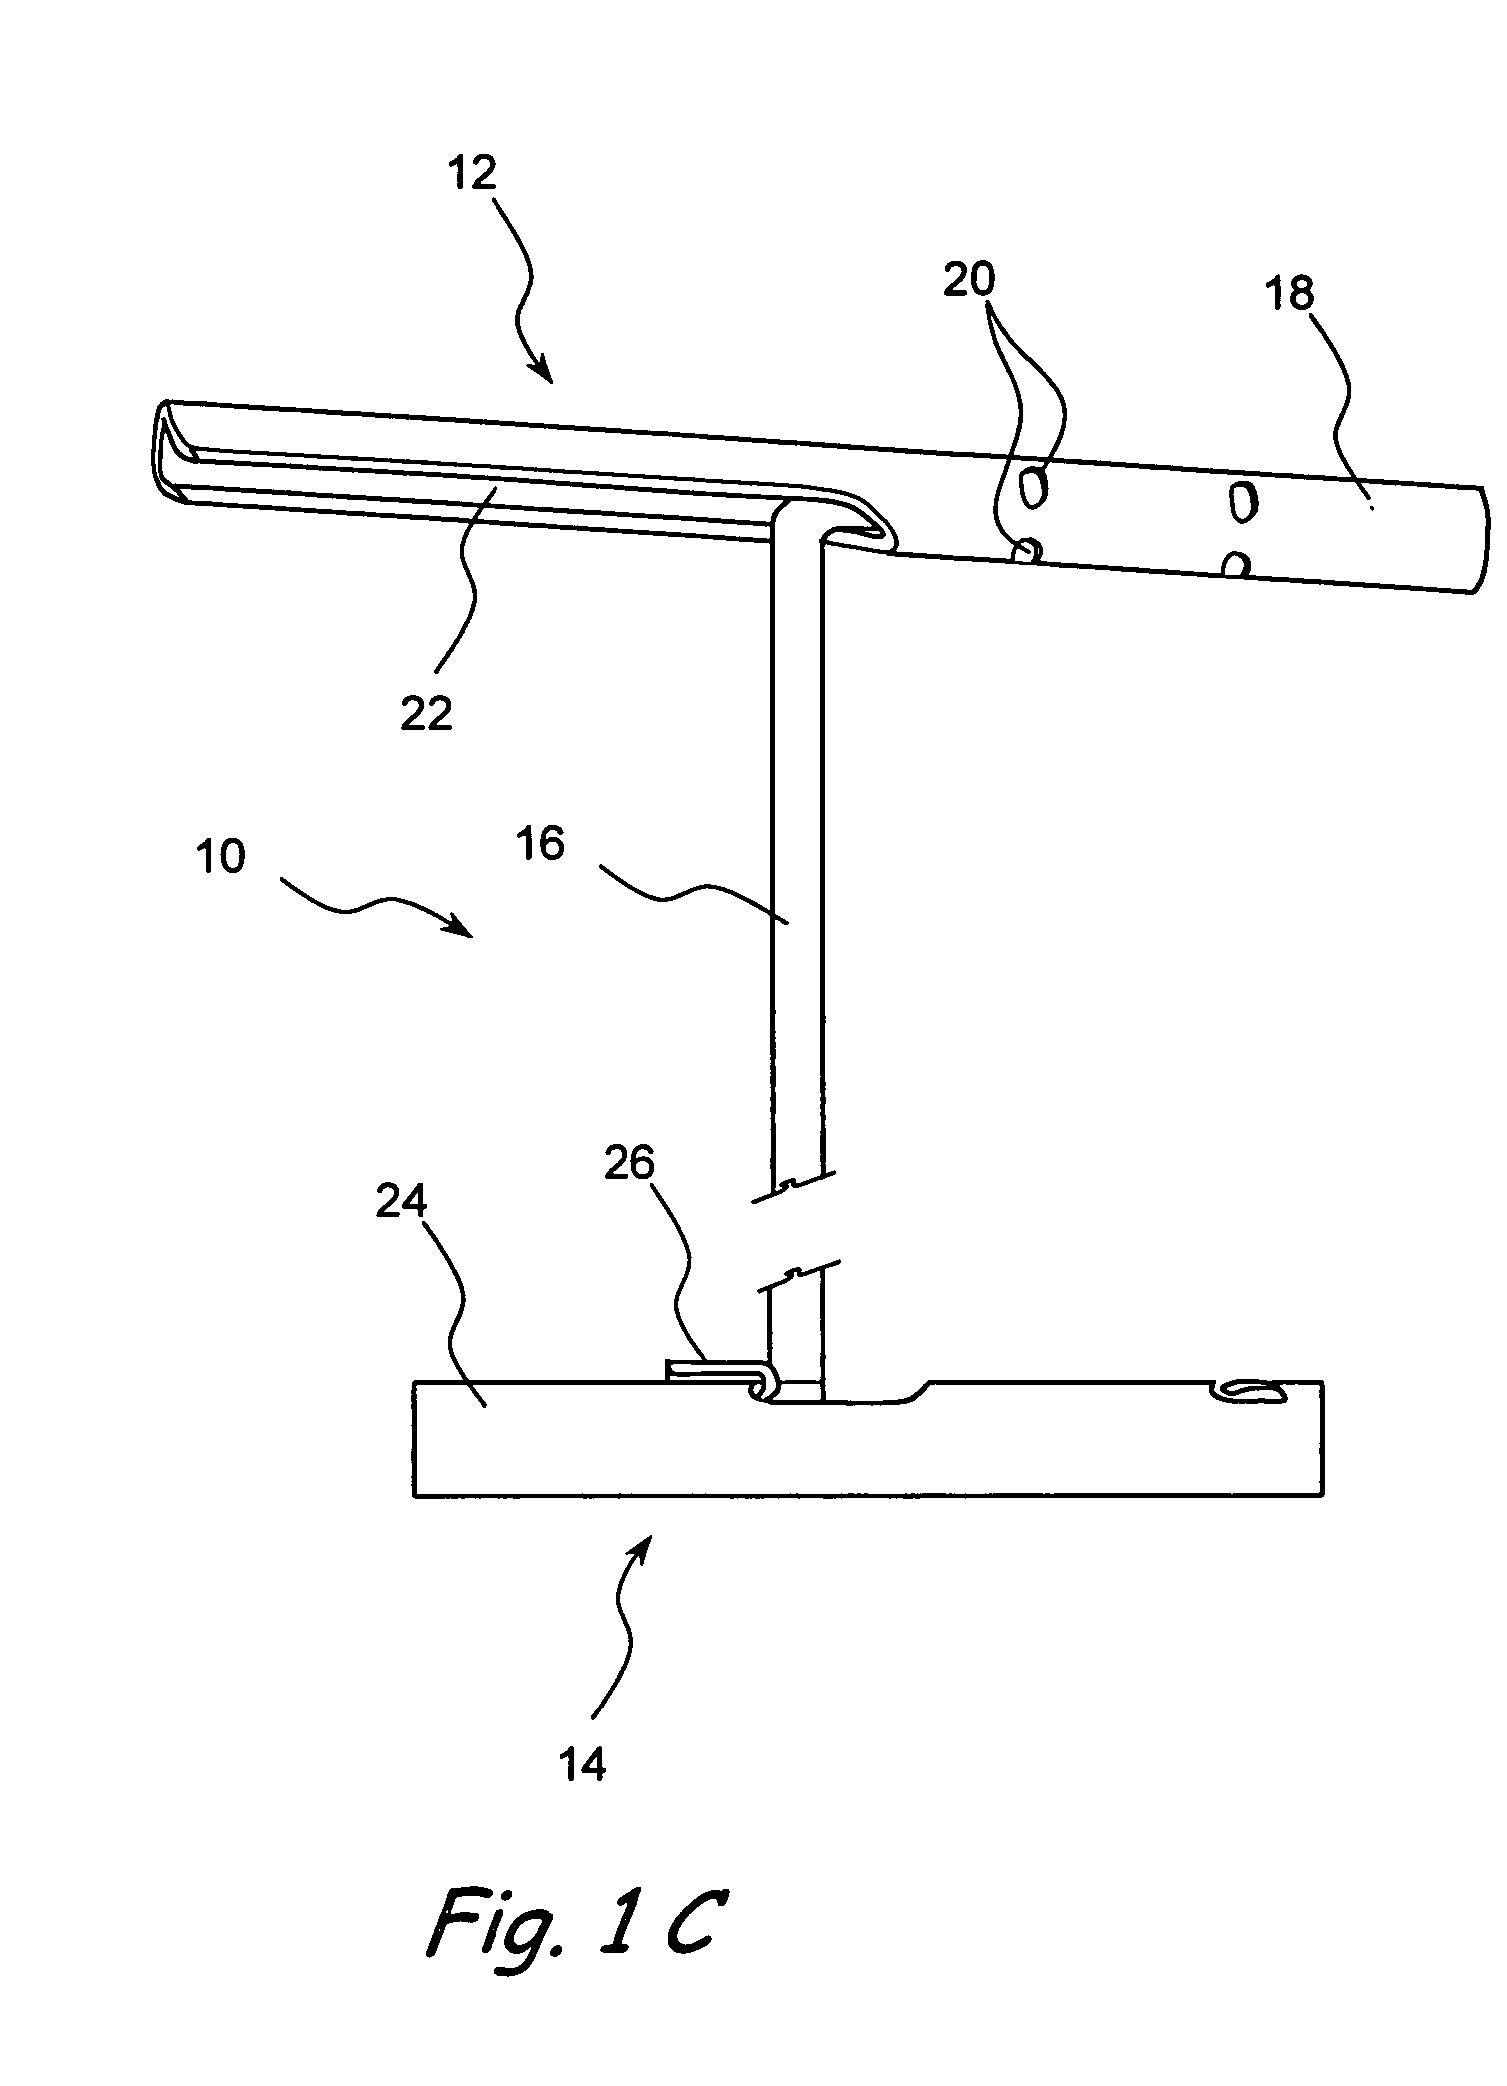 Devices, systems and methods for retracting, lifting, compressing, supporting or repositioning tissues or anatomical structures